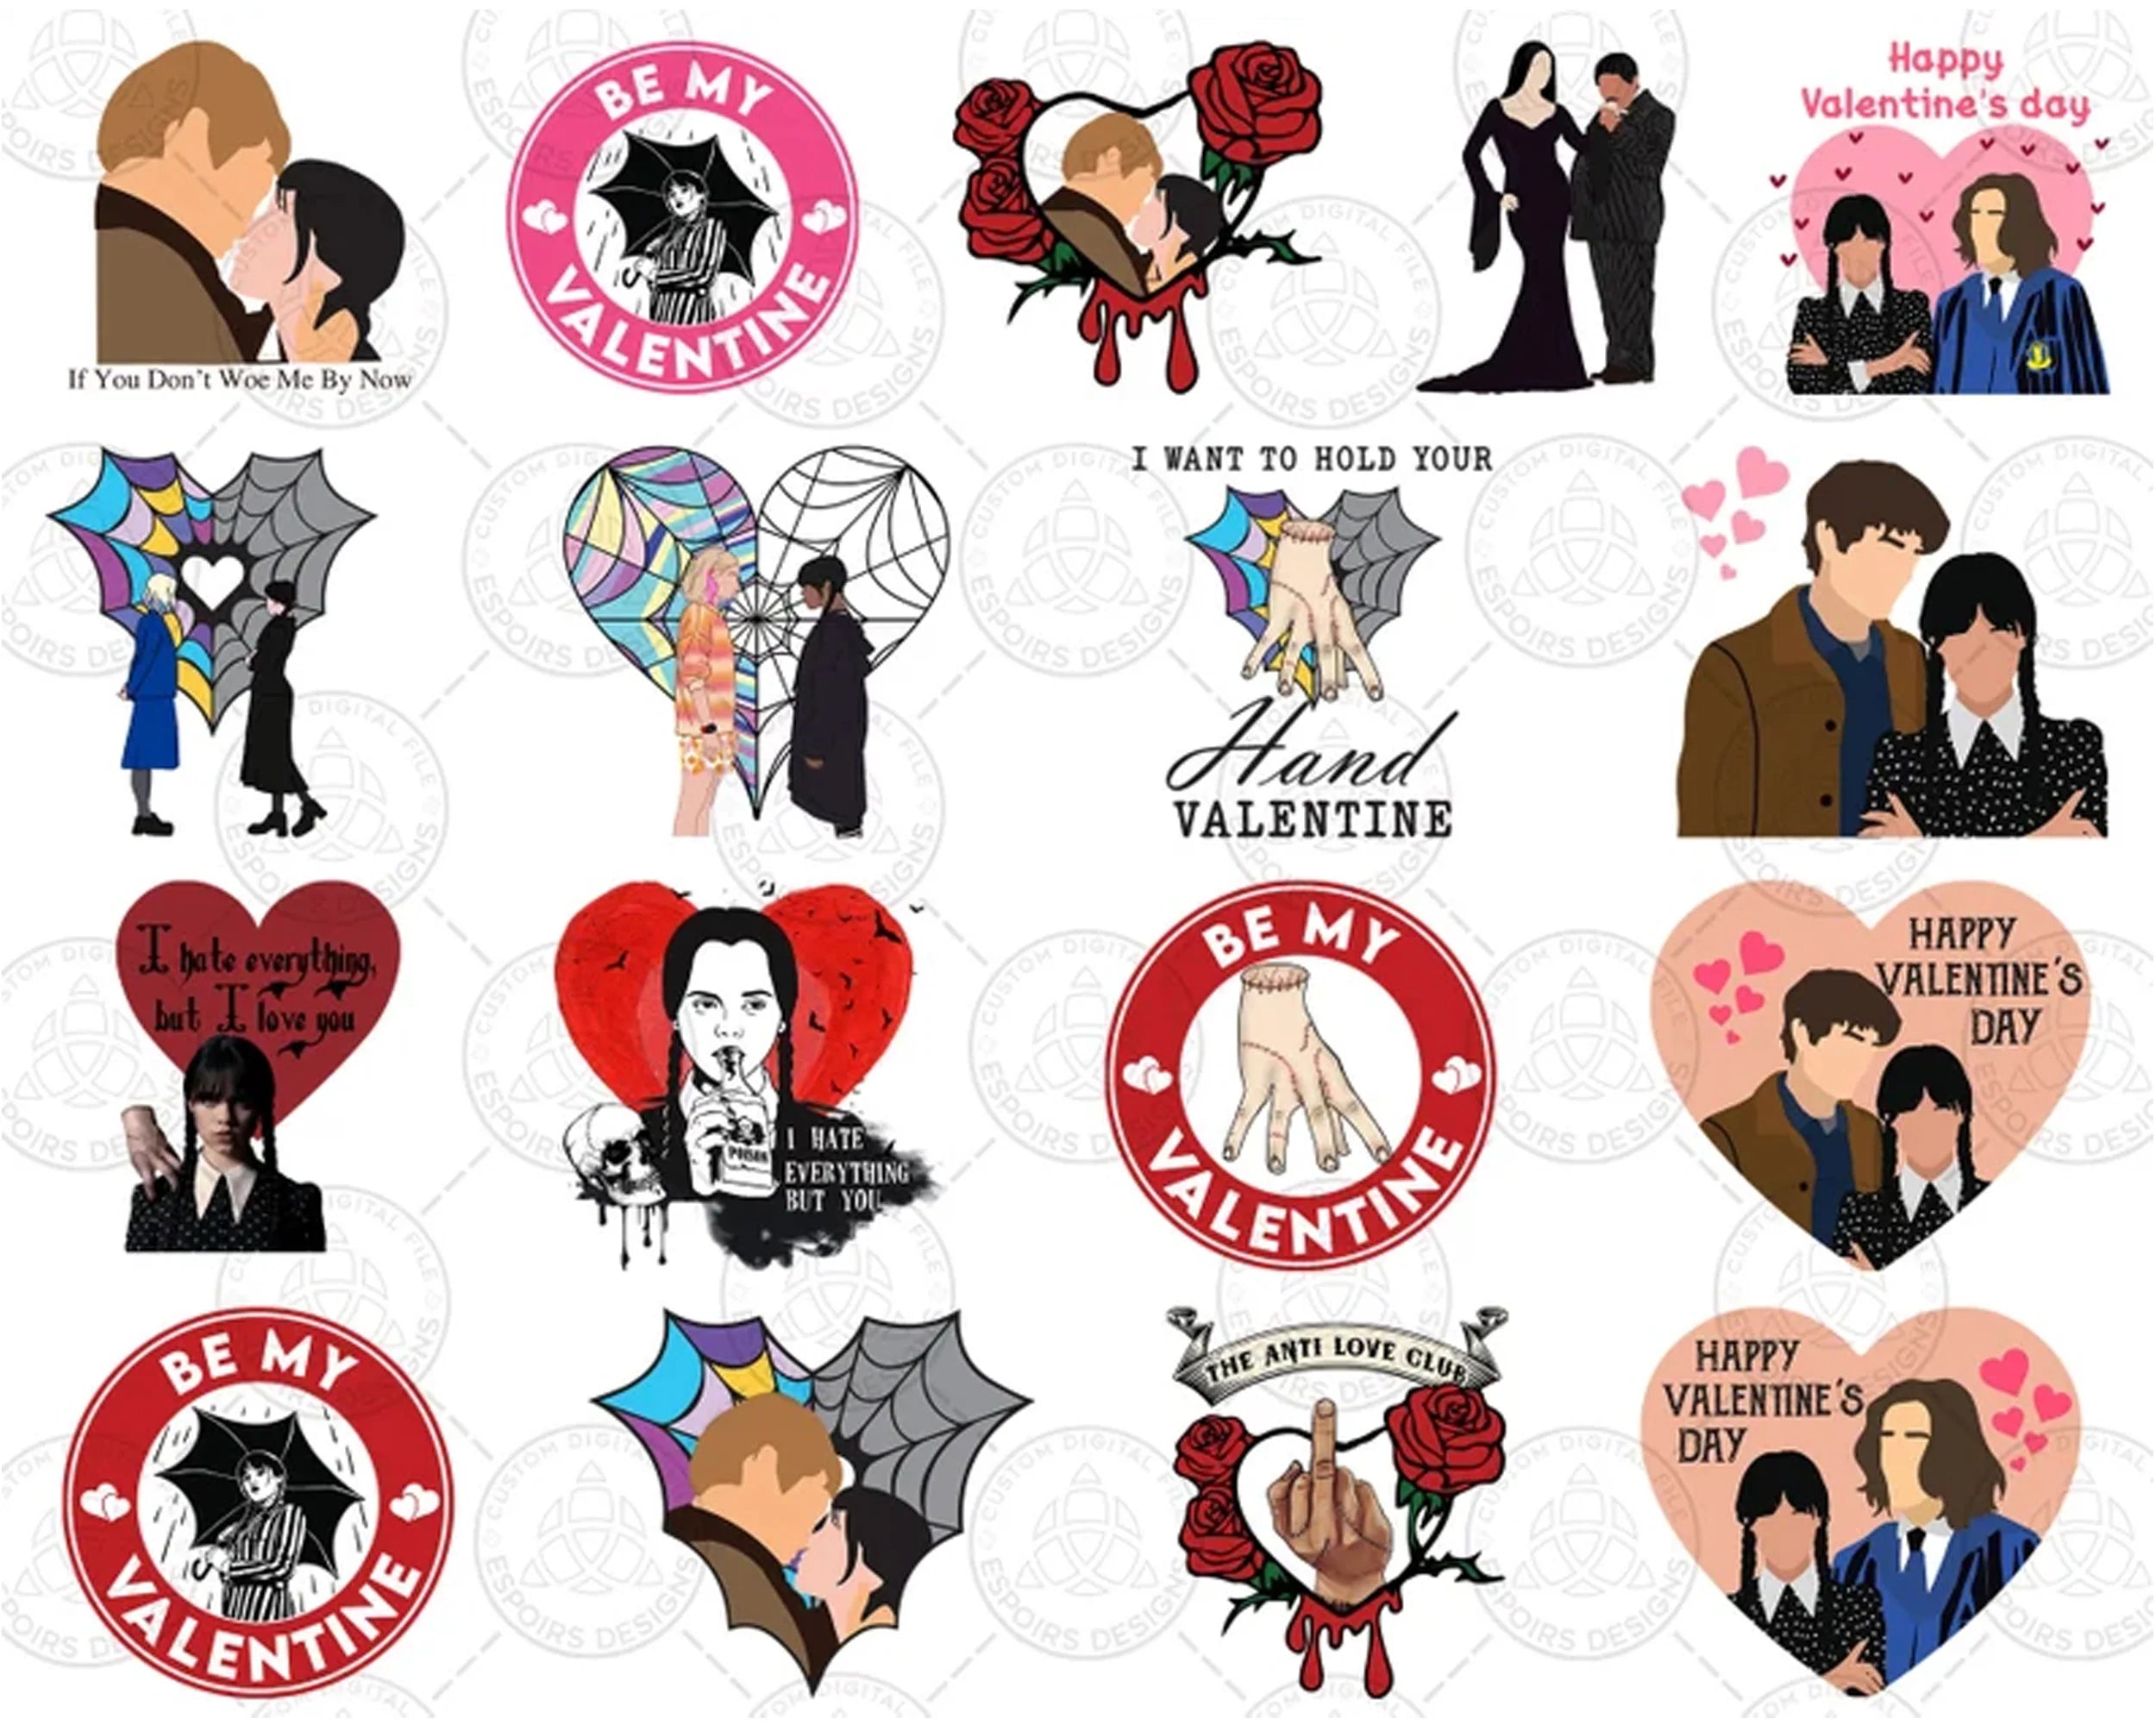 35+ Valentine Wed Addams PNG Bundle, Valentine Movies Png, Valentine Wednes Png, Nevermore Academy Png